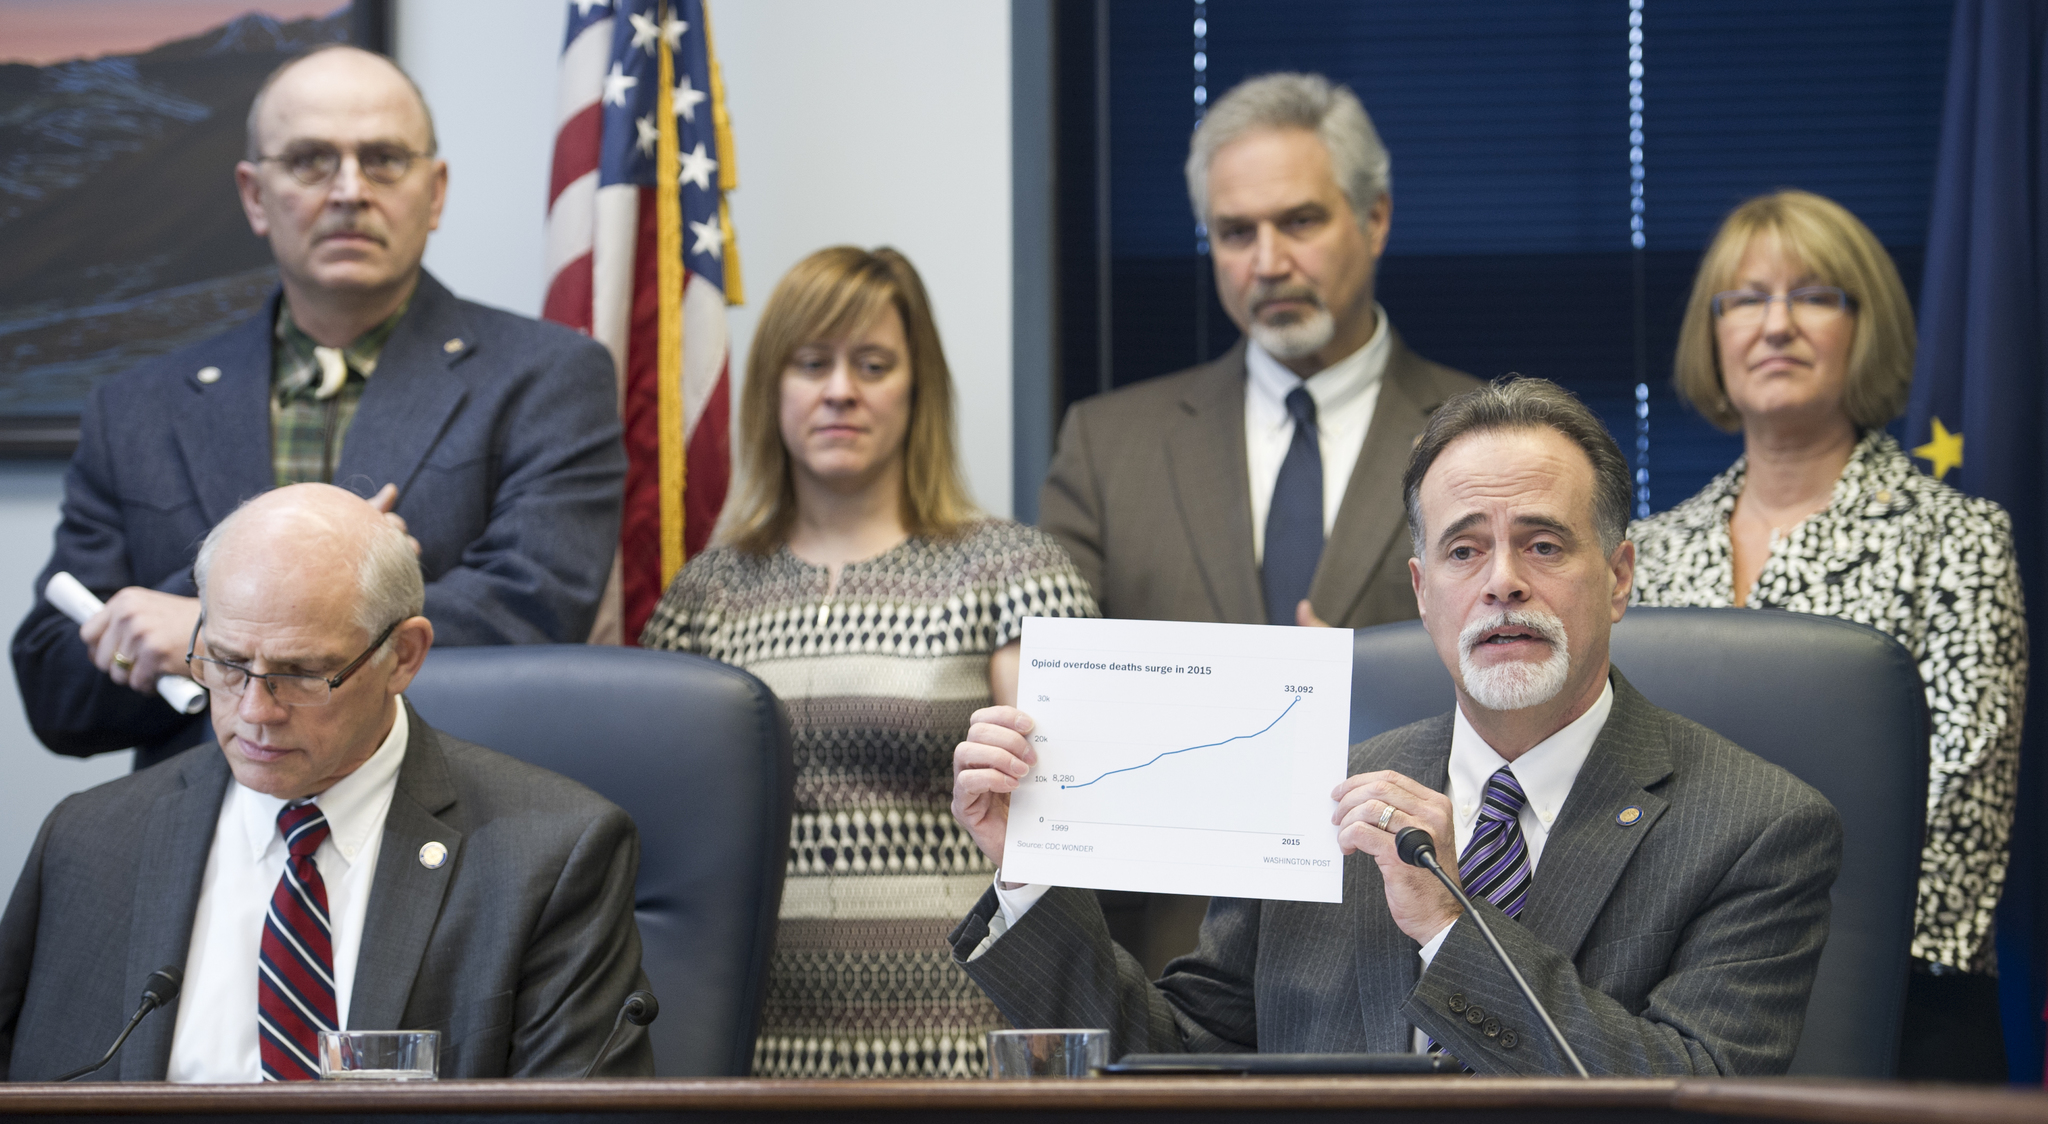 Sen. Peter Micciche, R-Soldotna, lower right, holds a graph showing the rise in opioid overdose deaths during a Senate Majority press conference on justice reform at the Capitol on Wednesday, Feb. 1, 2017. Attending also are Sen. John Coghill, R-North Pole, lower left, Sen. Chip Bishop, R-Fairbanks, upper left, Sen. Mia Costello, R-Anchorage, Senate President Pete Kelly, R-Fairbanks, and Sen. Anna MacKinnon, R-Eagle River, upper right. (Michael Penn/Juneau Empire)